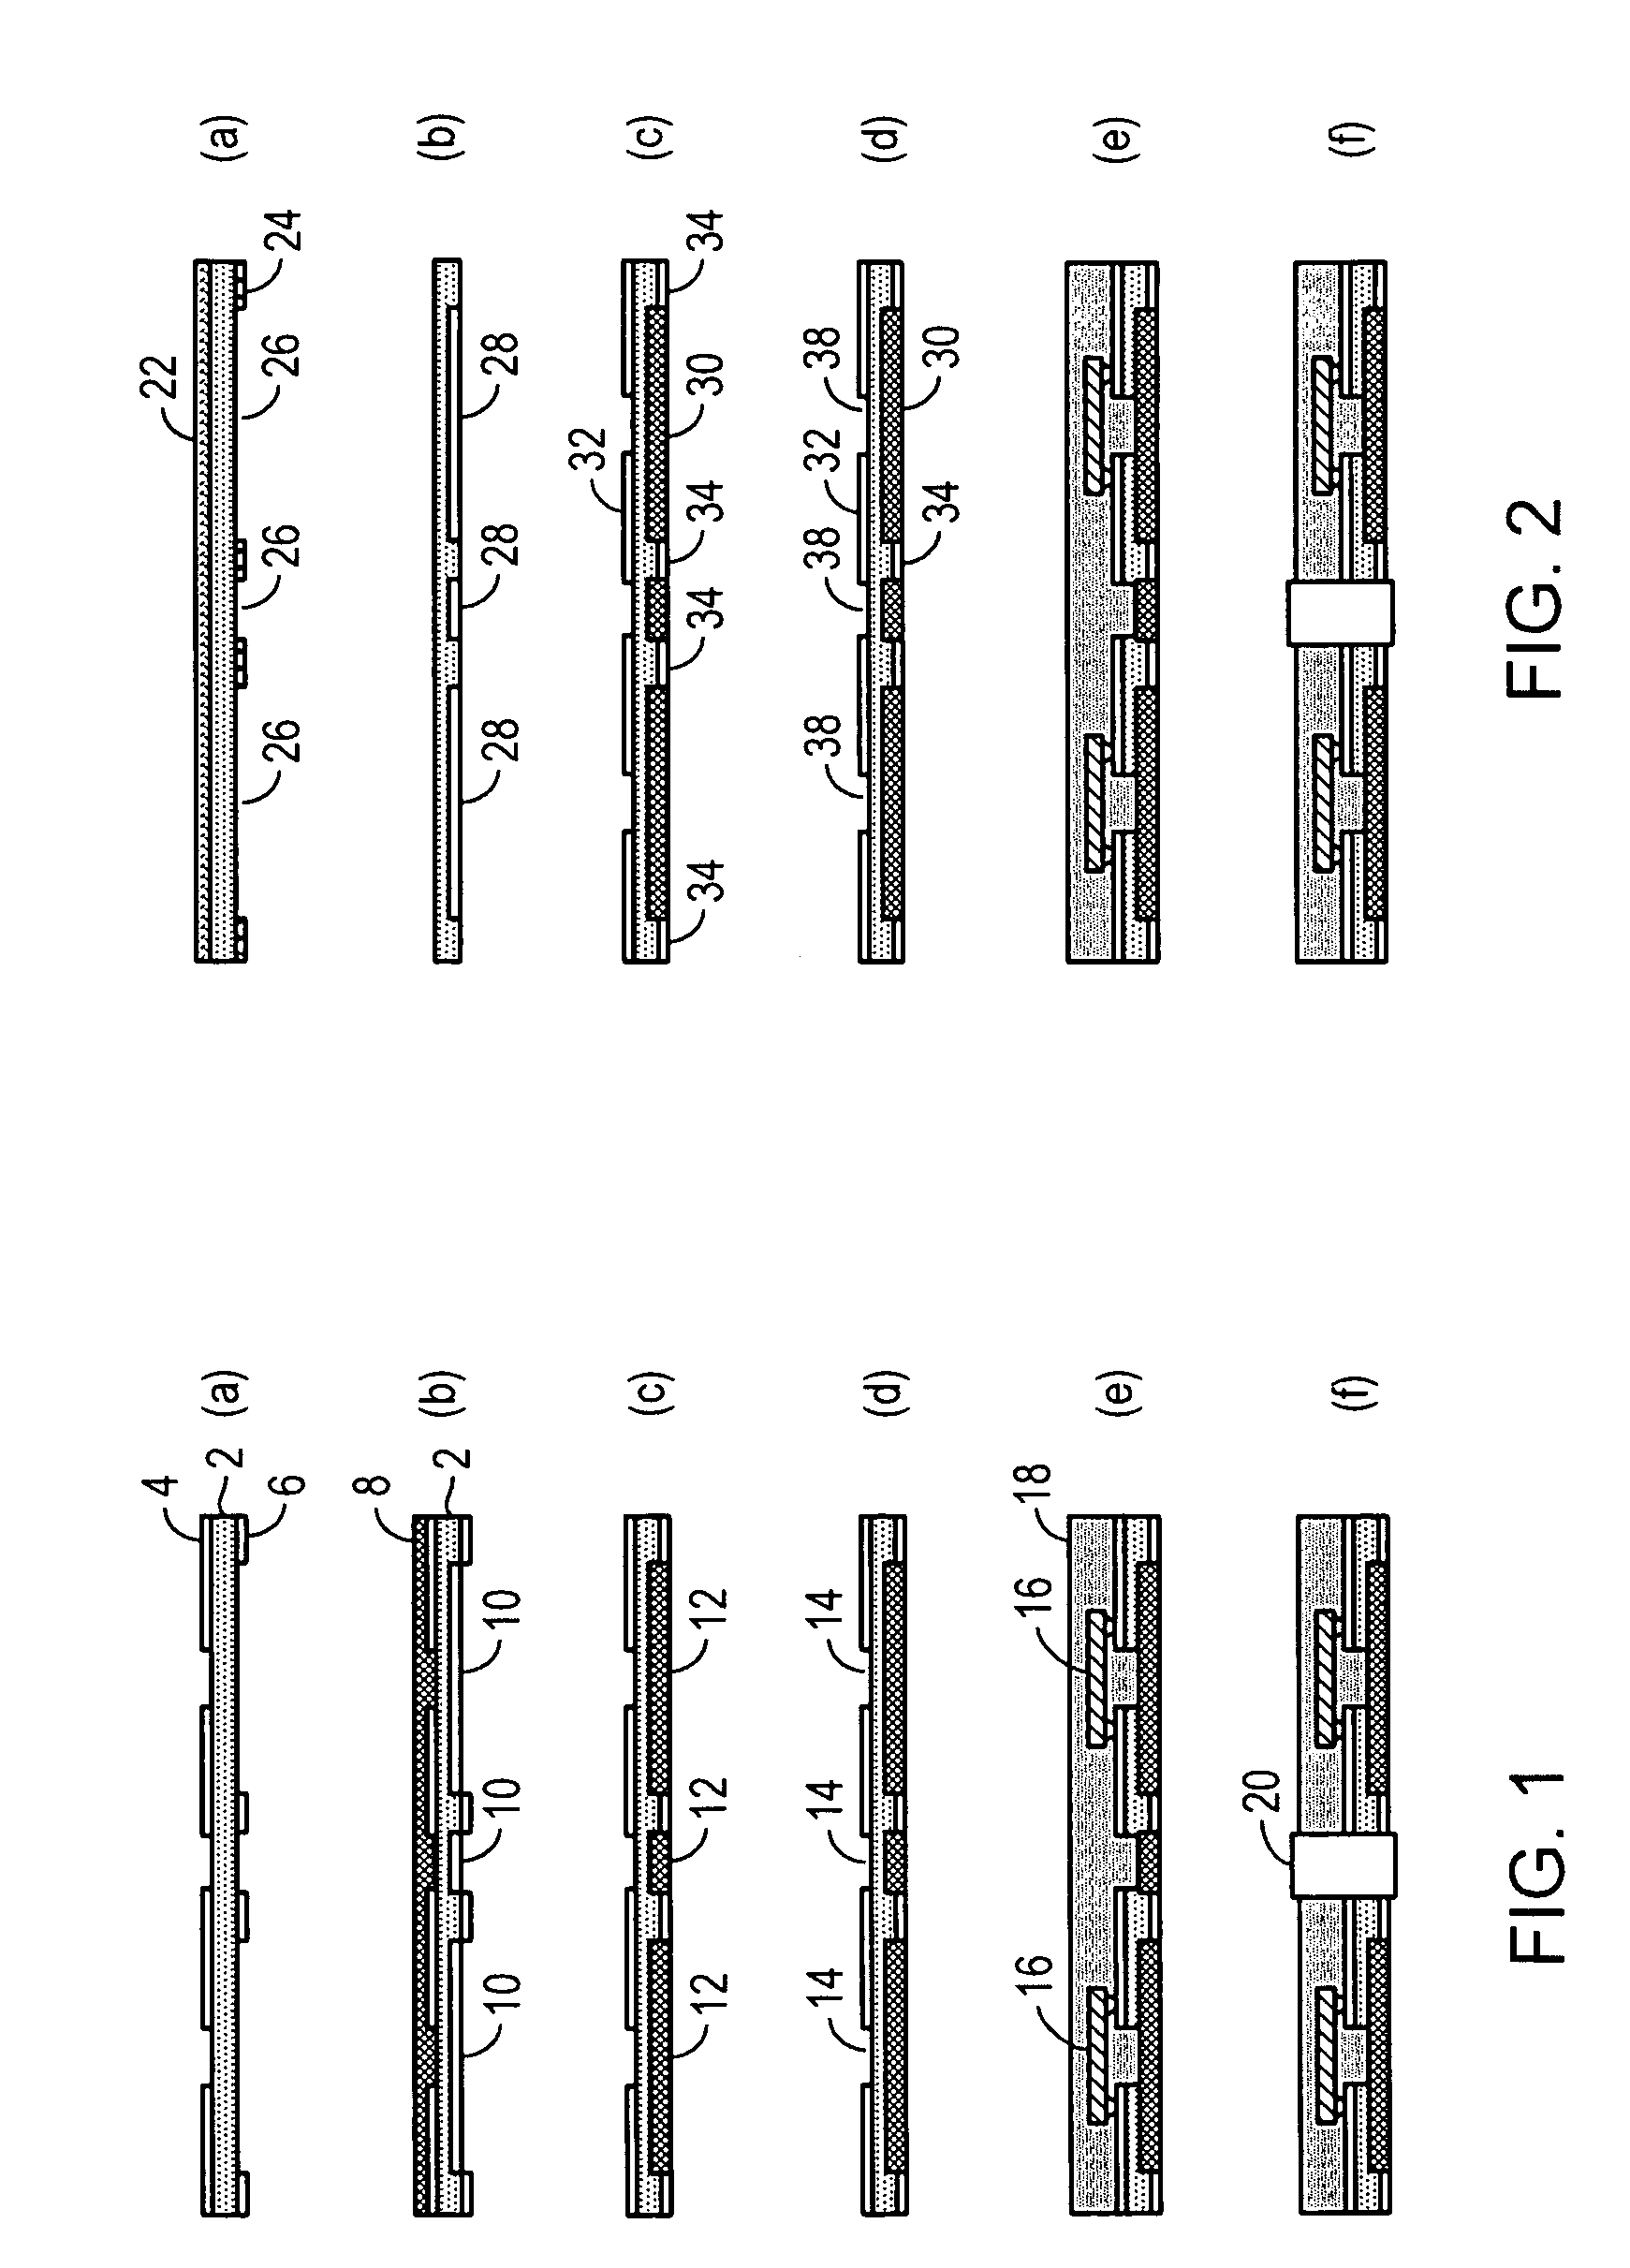 Method of making and designing lead frames for semiconductor packages